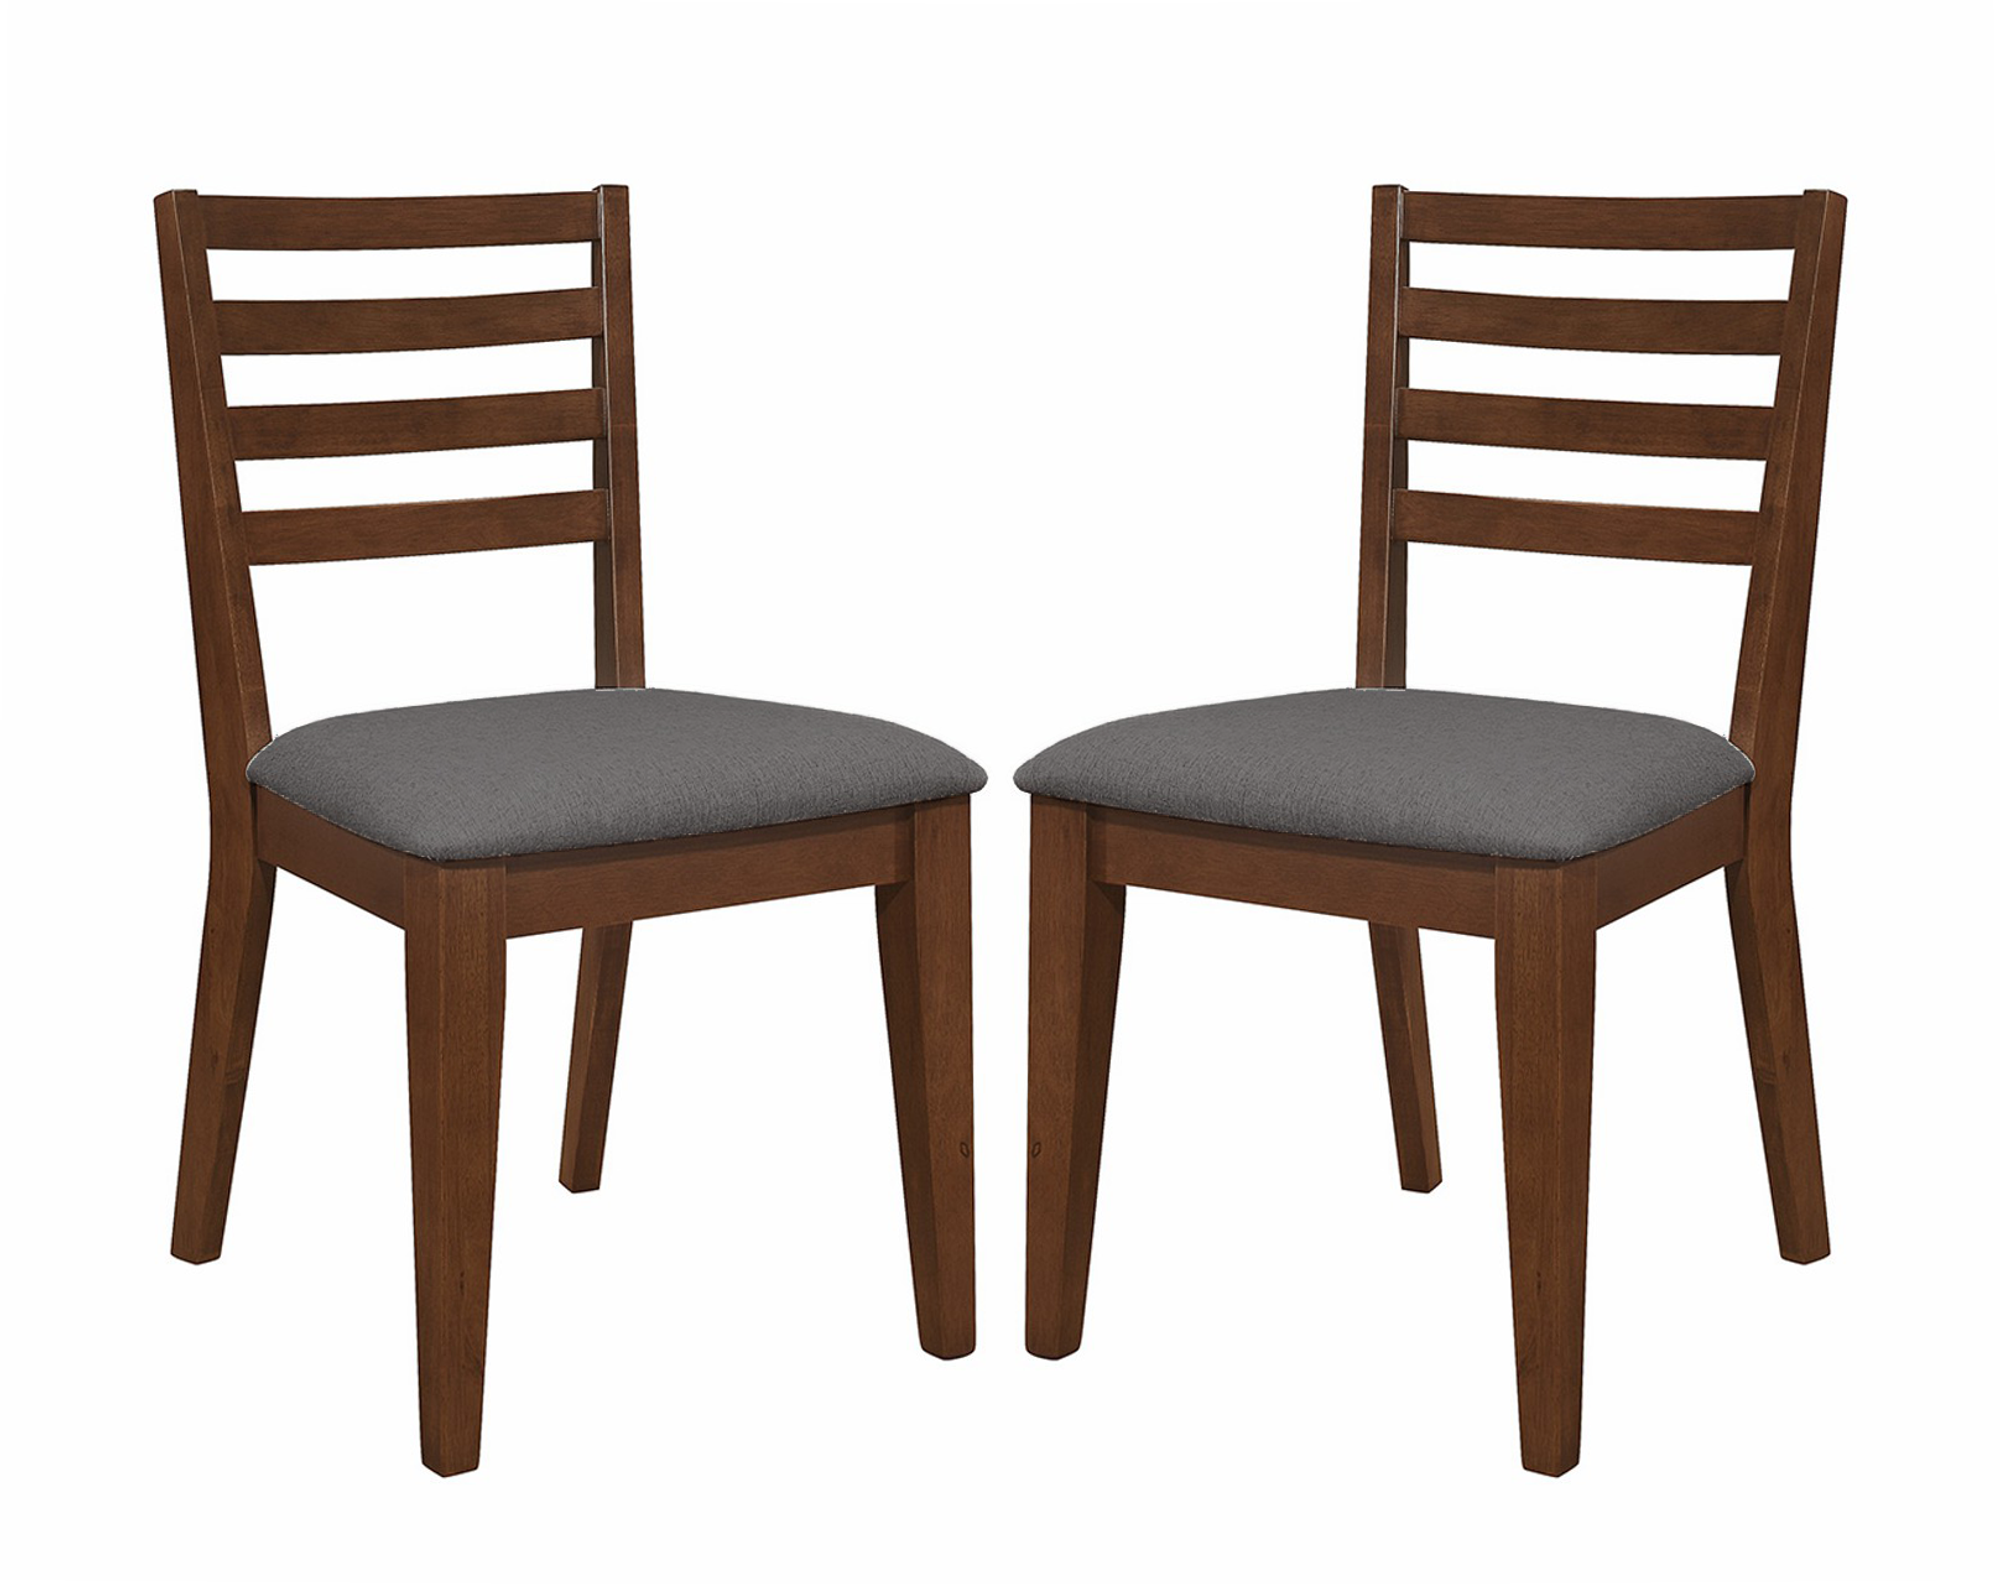 Afton Ladder Back Side Chair (Set of 2) - Free Shipping